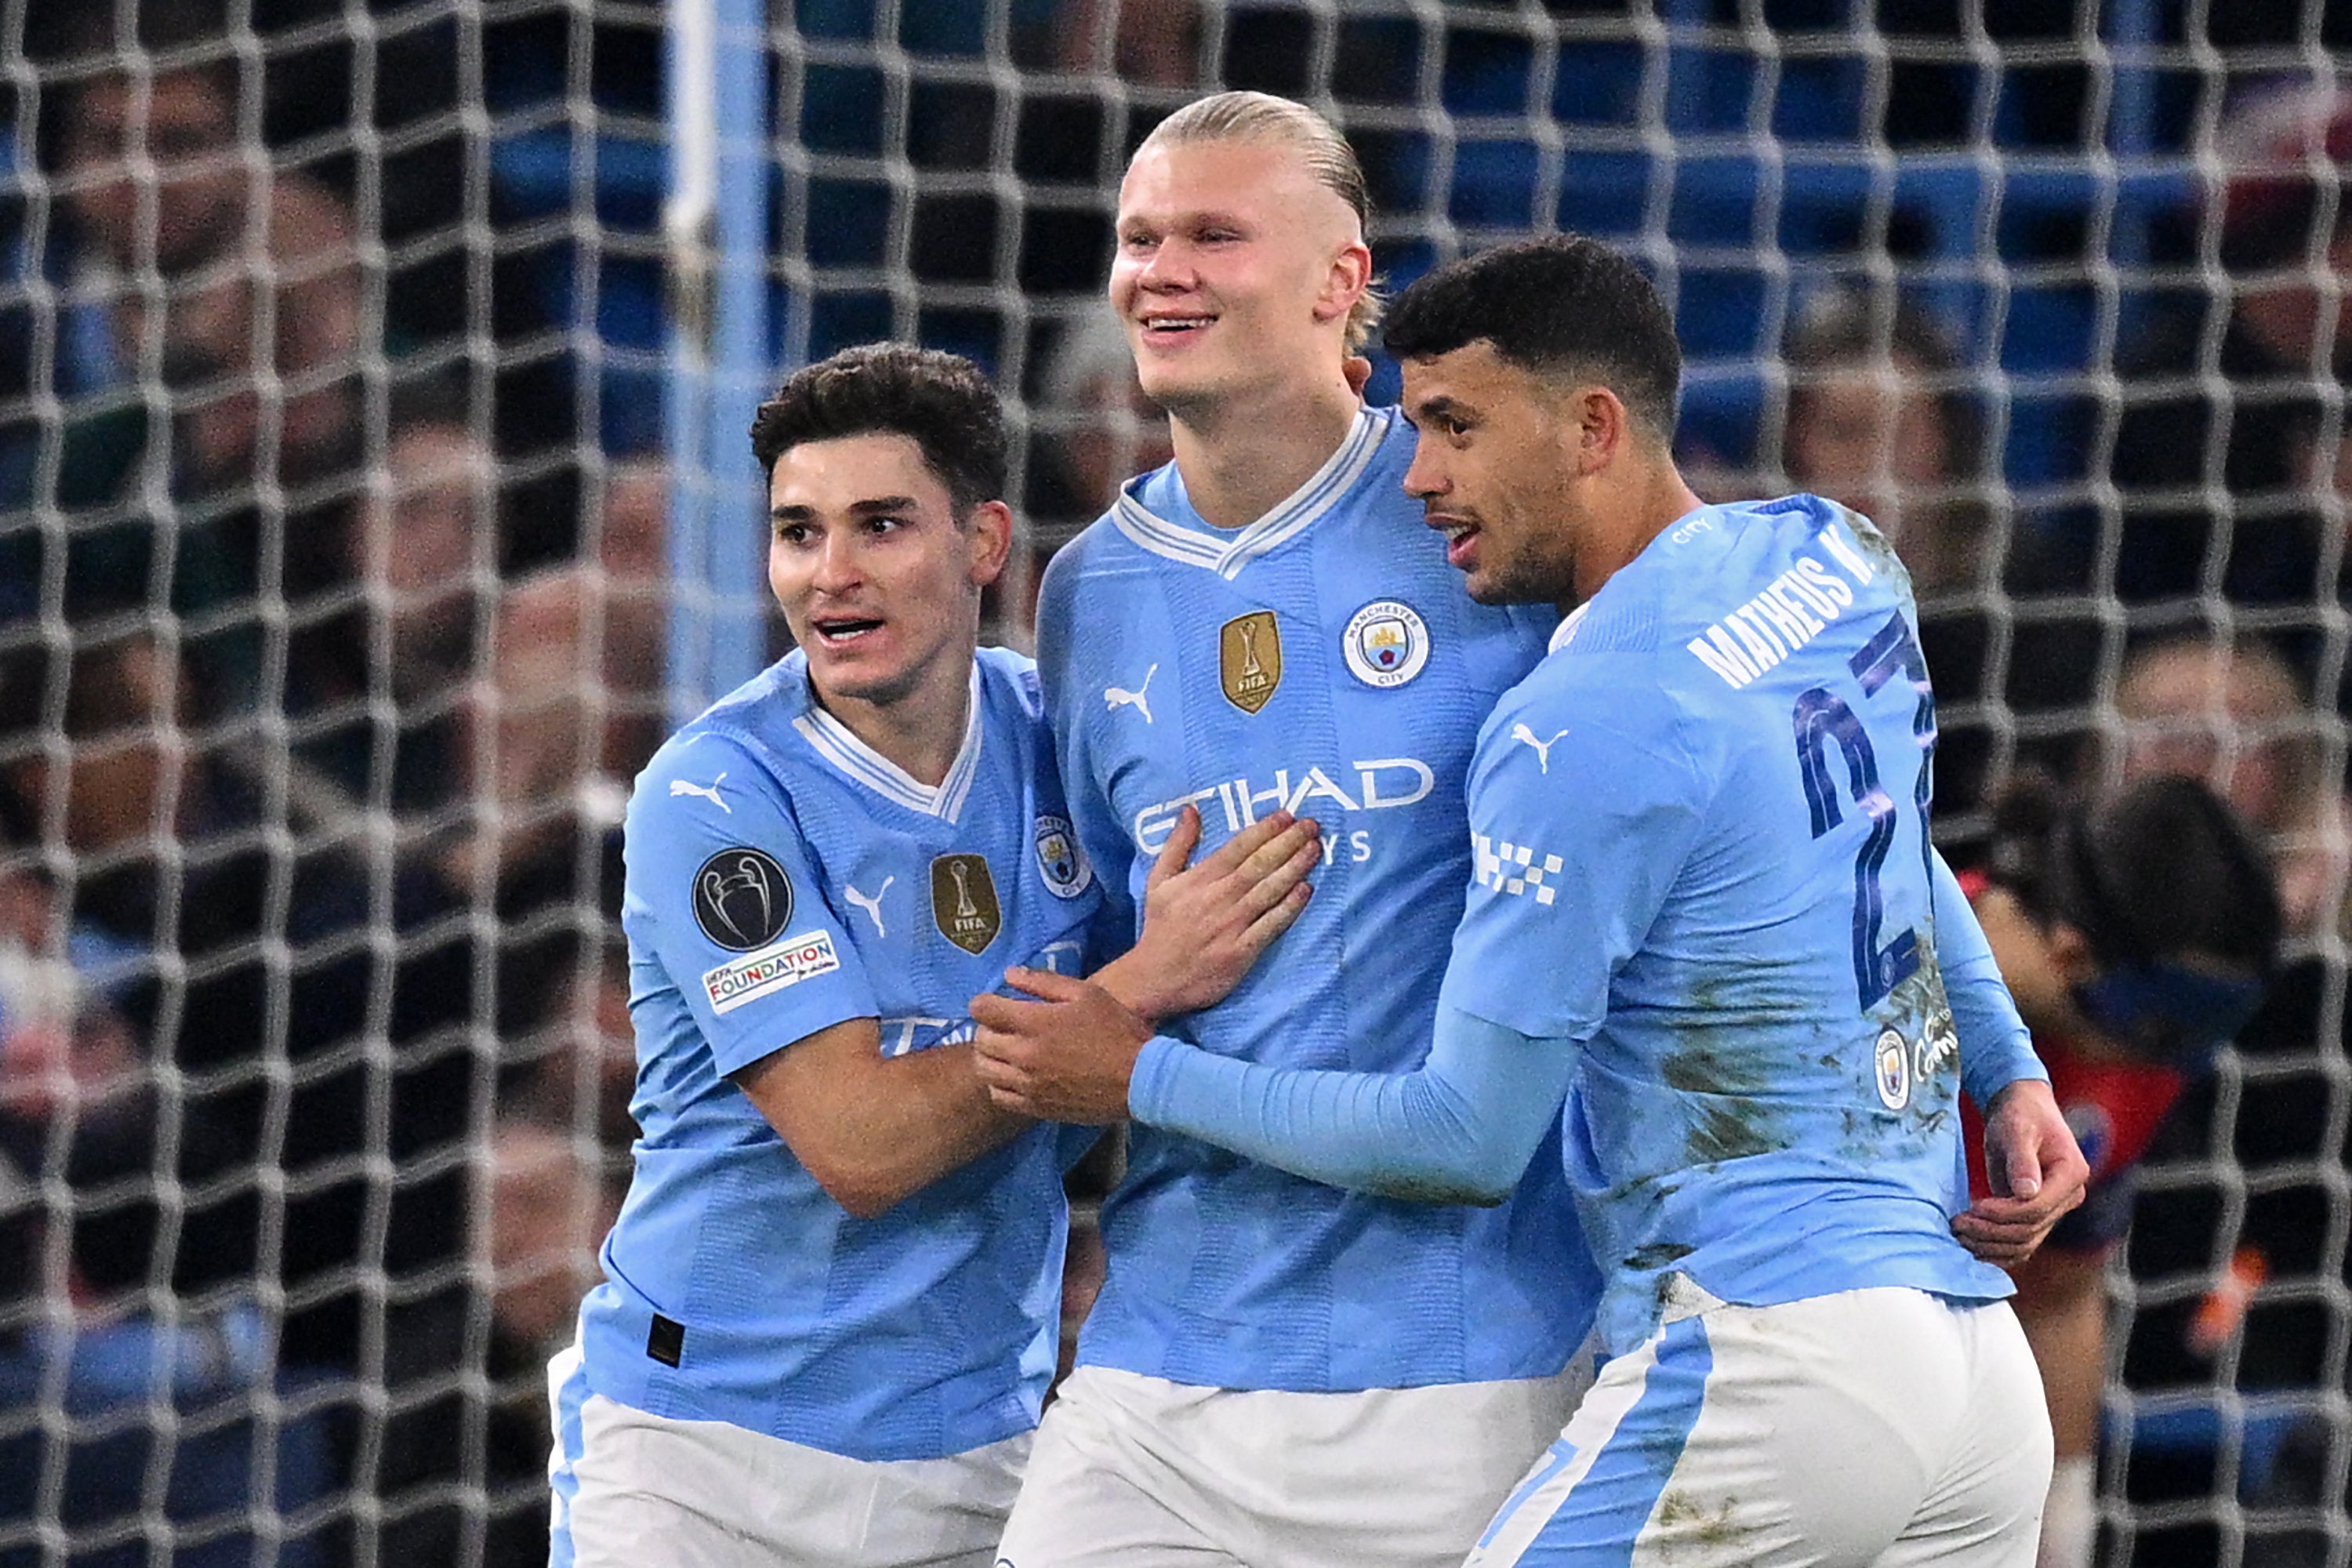 Erling Haaland netted Man City’s third goal to keep up his goalscoring form